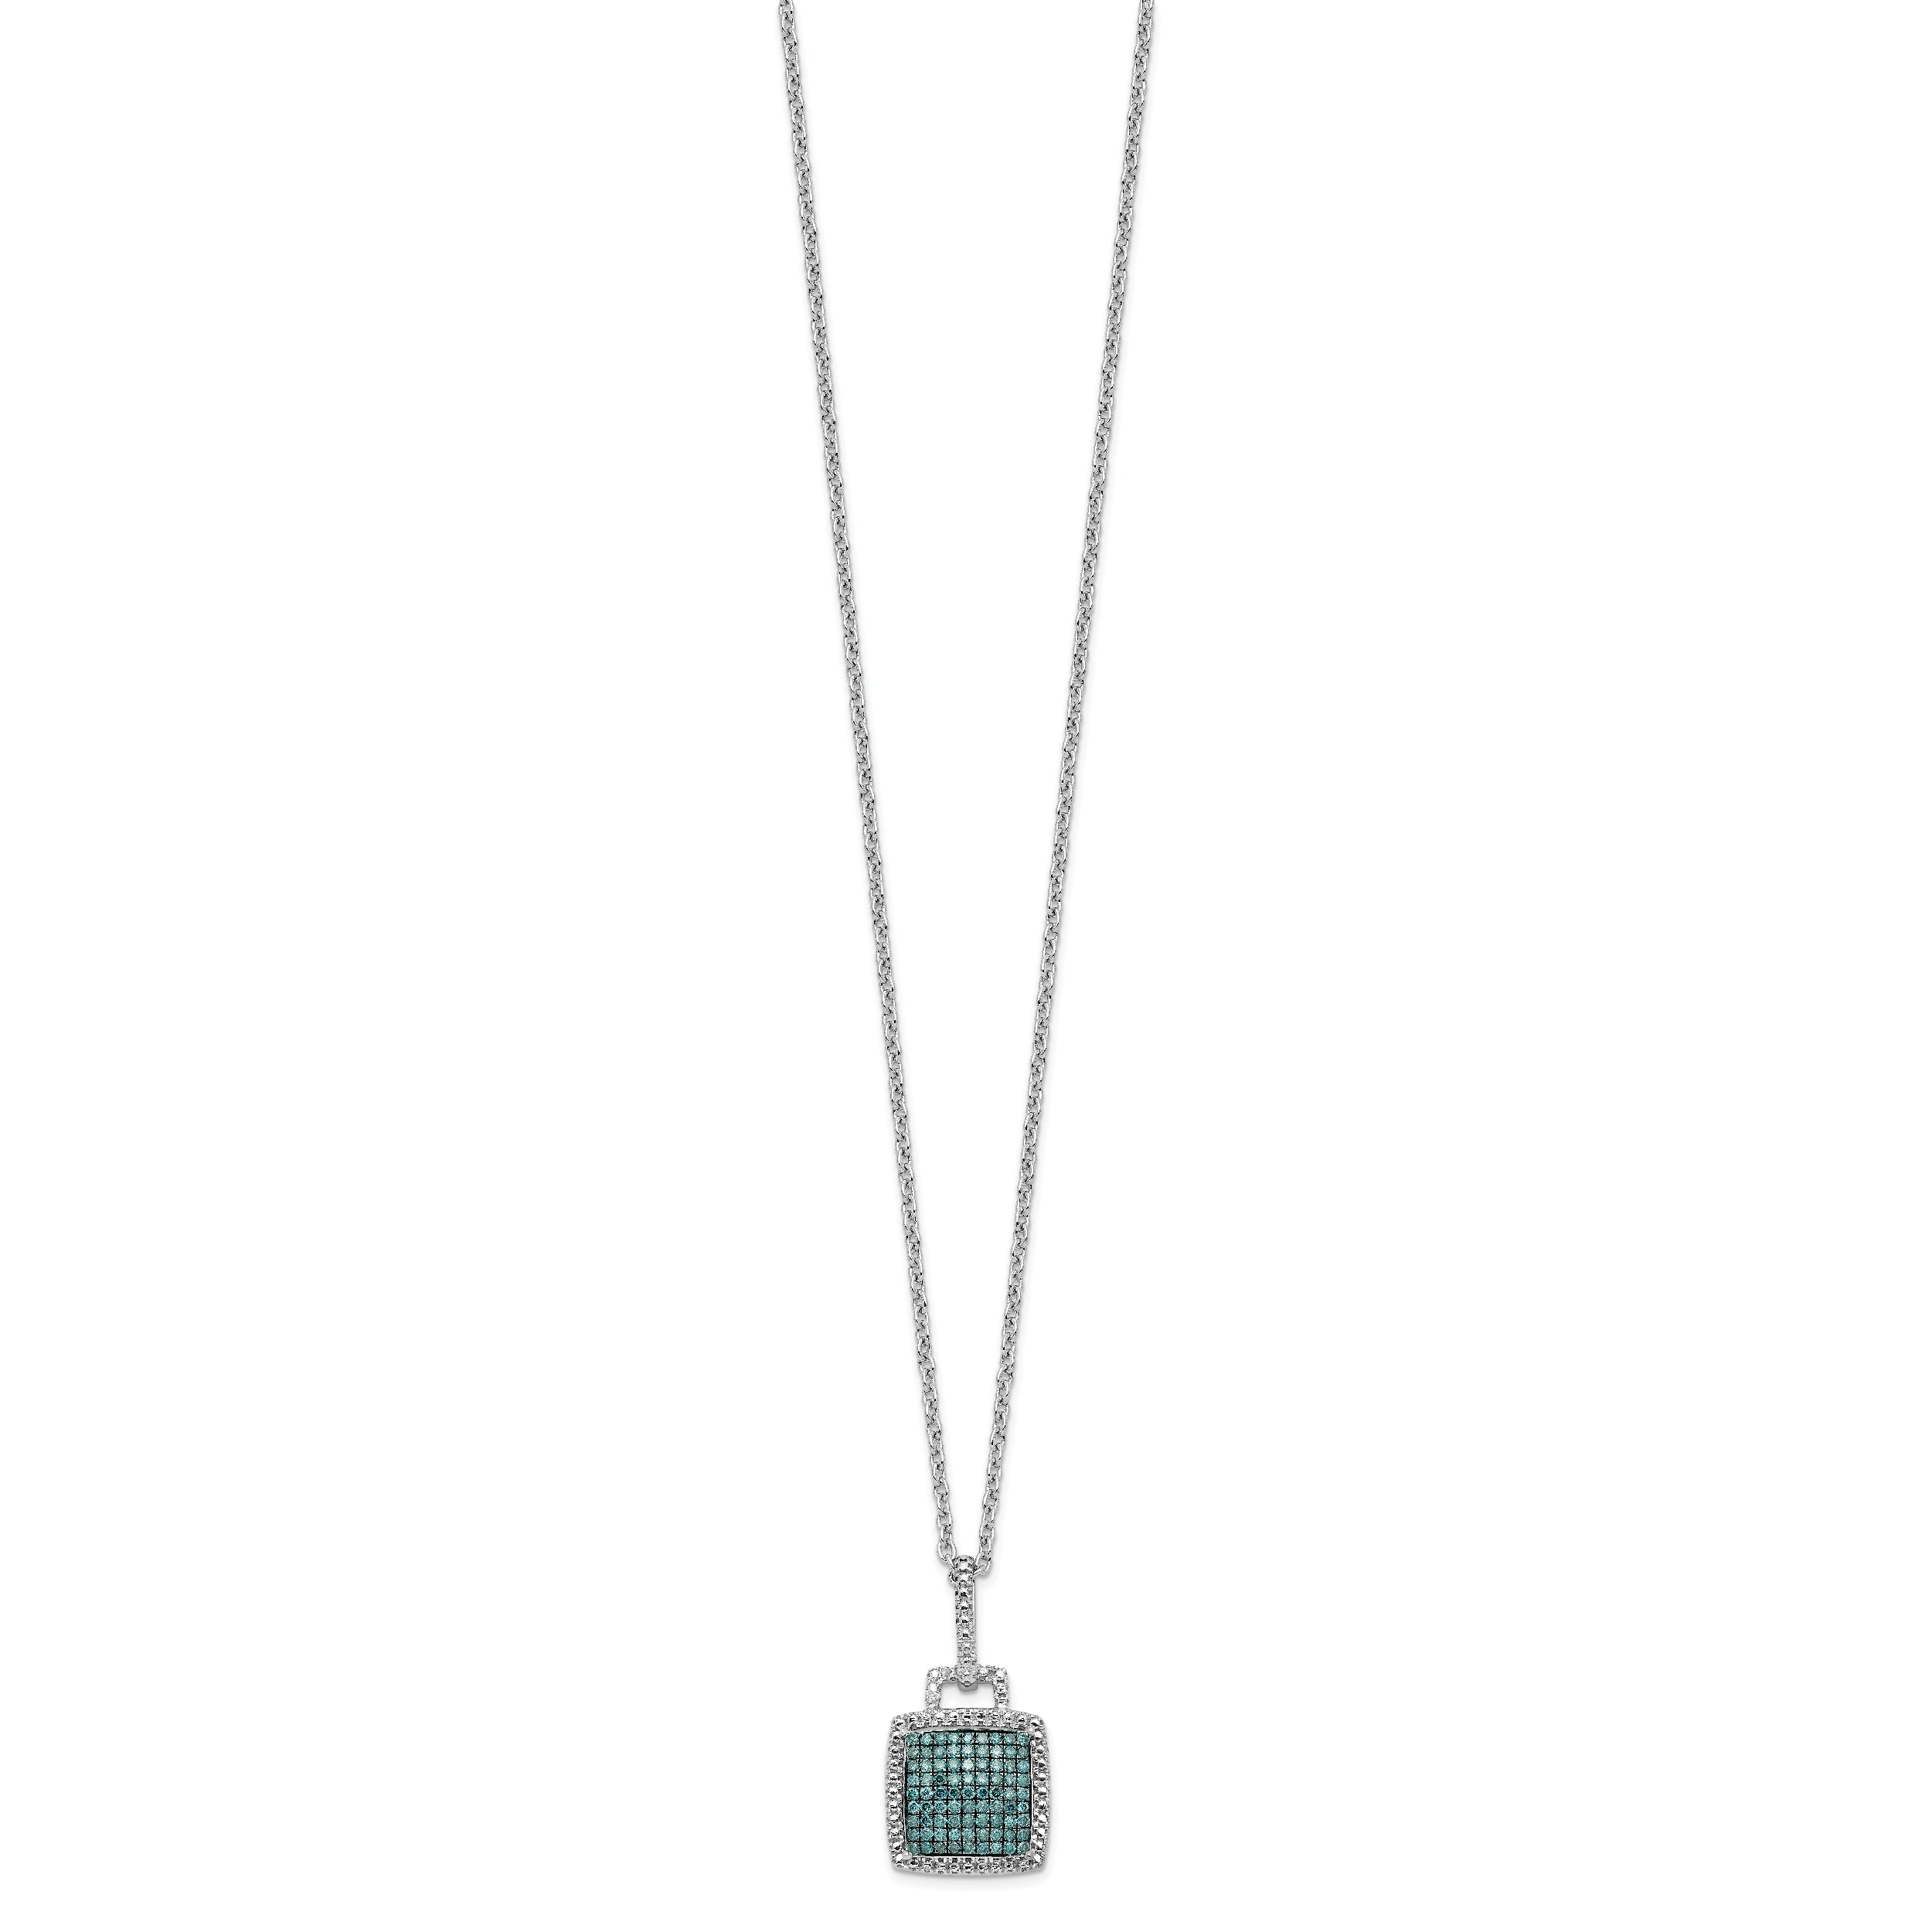 White Night Sterling Silver Rhodium-plated Blue Diamond Square Pendant 18 inch Necklace with 2 Inch Extender